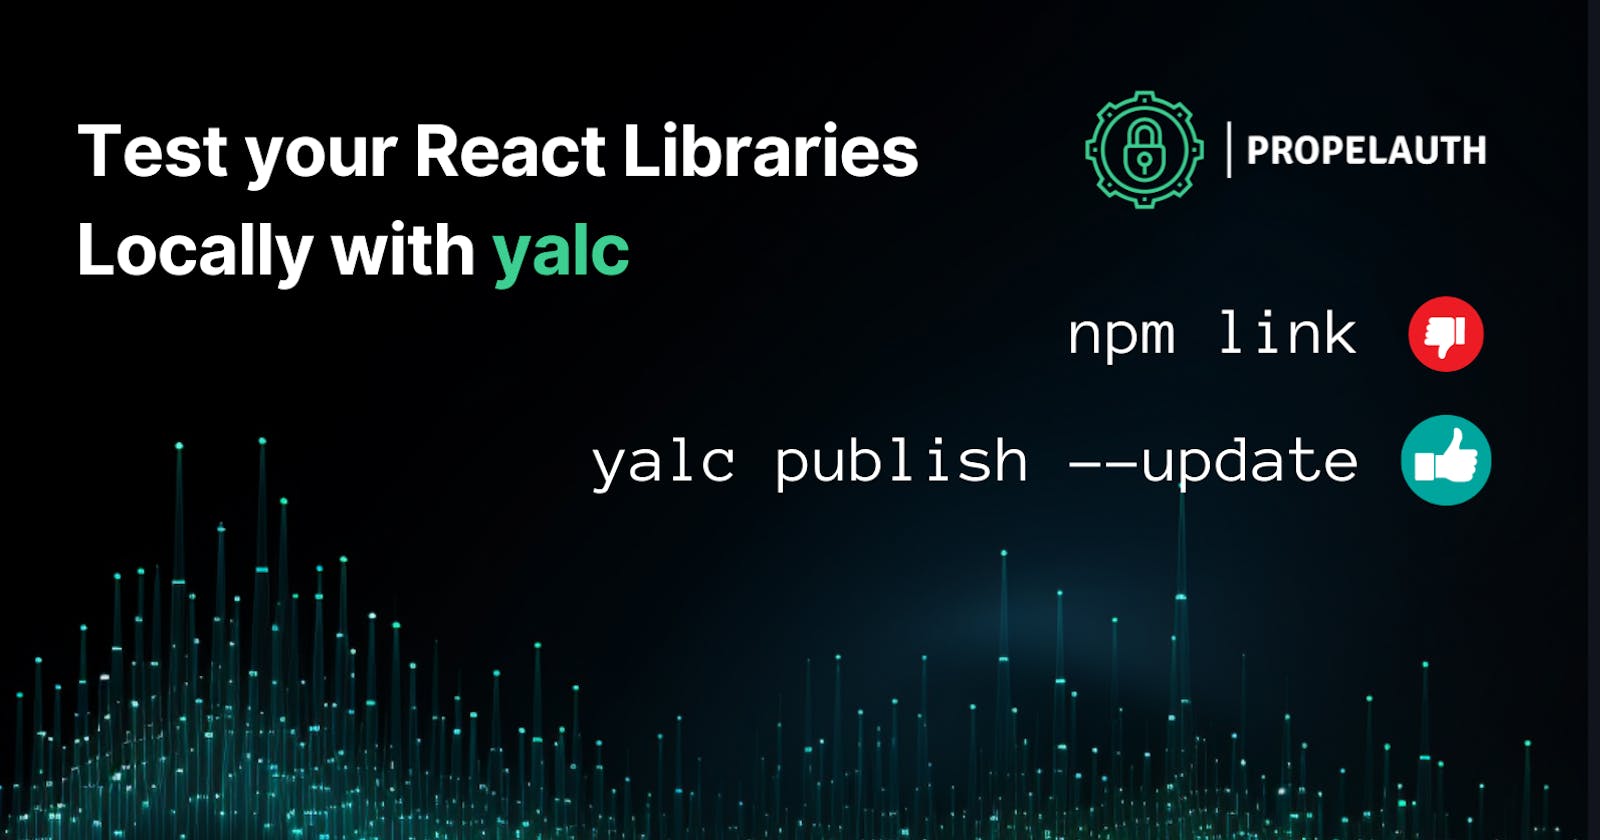 Test your React Libraries Locally with Yalc